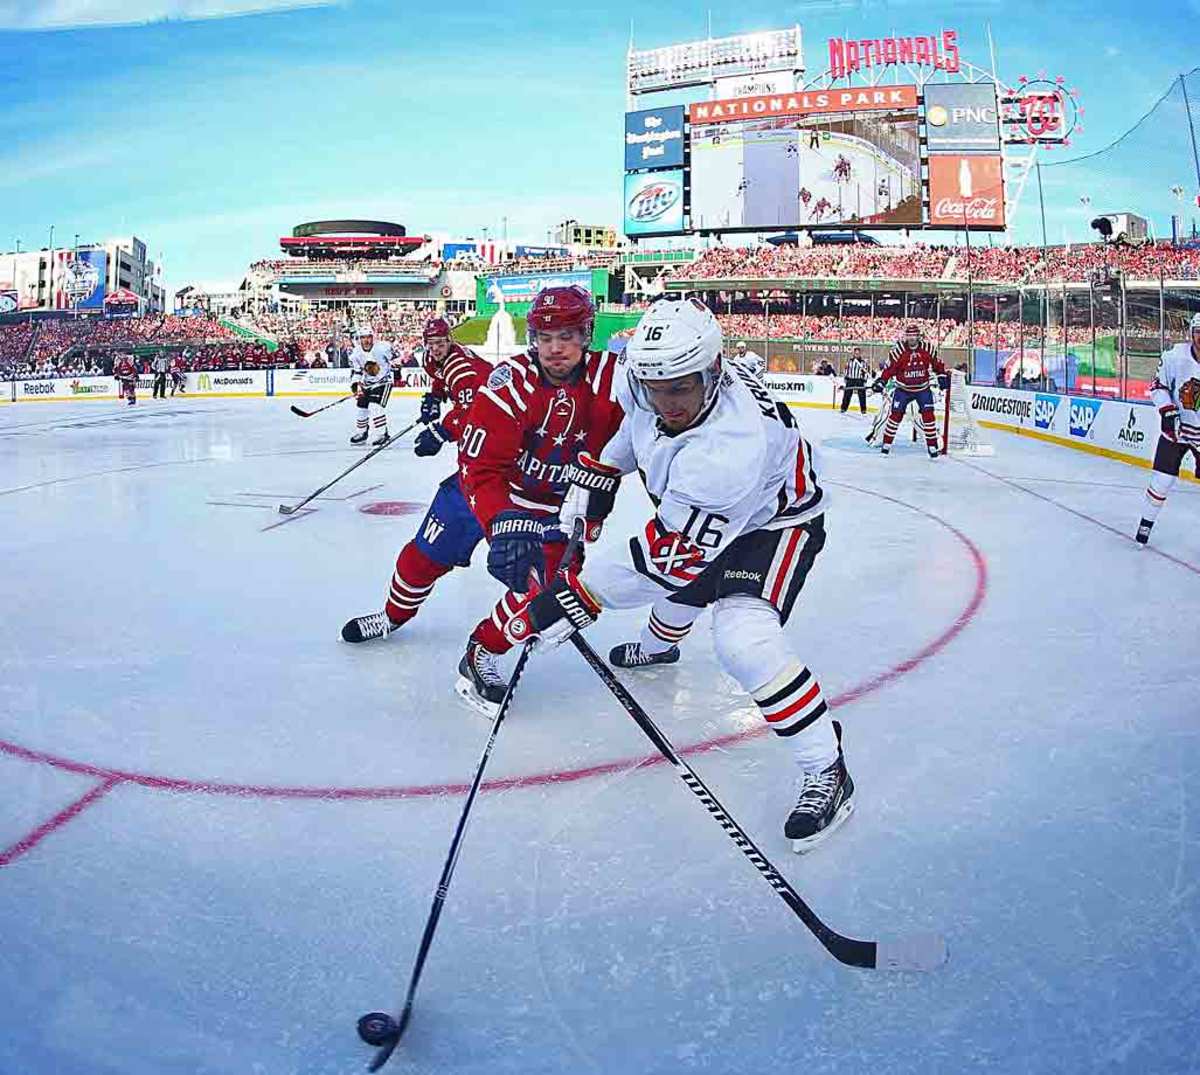 Winter Classic win over Chicago Blackhawks another sign Washington